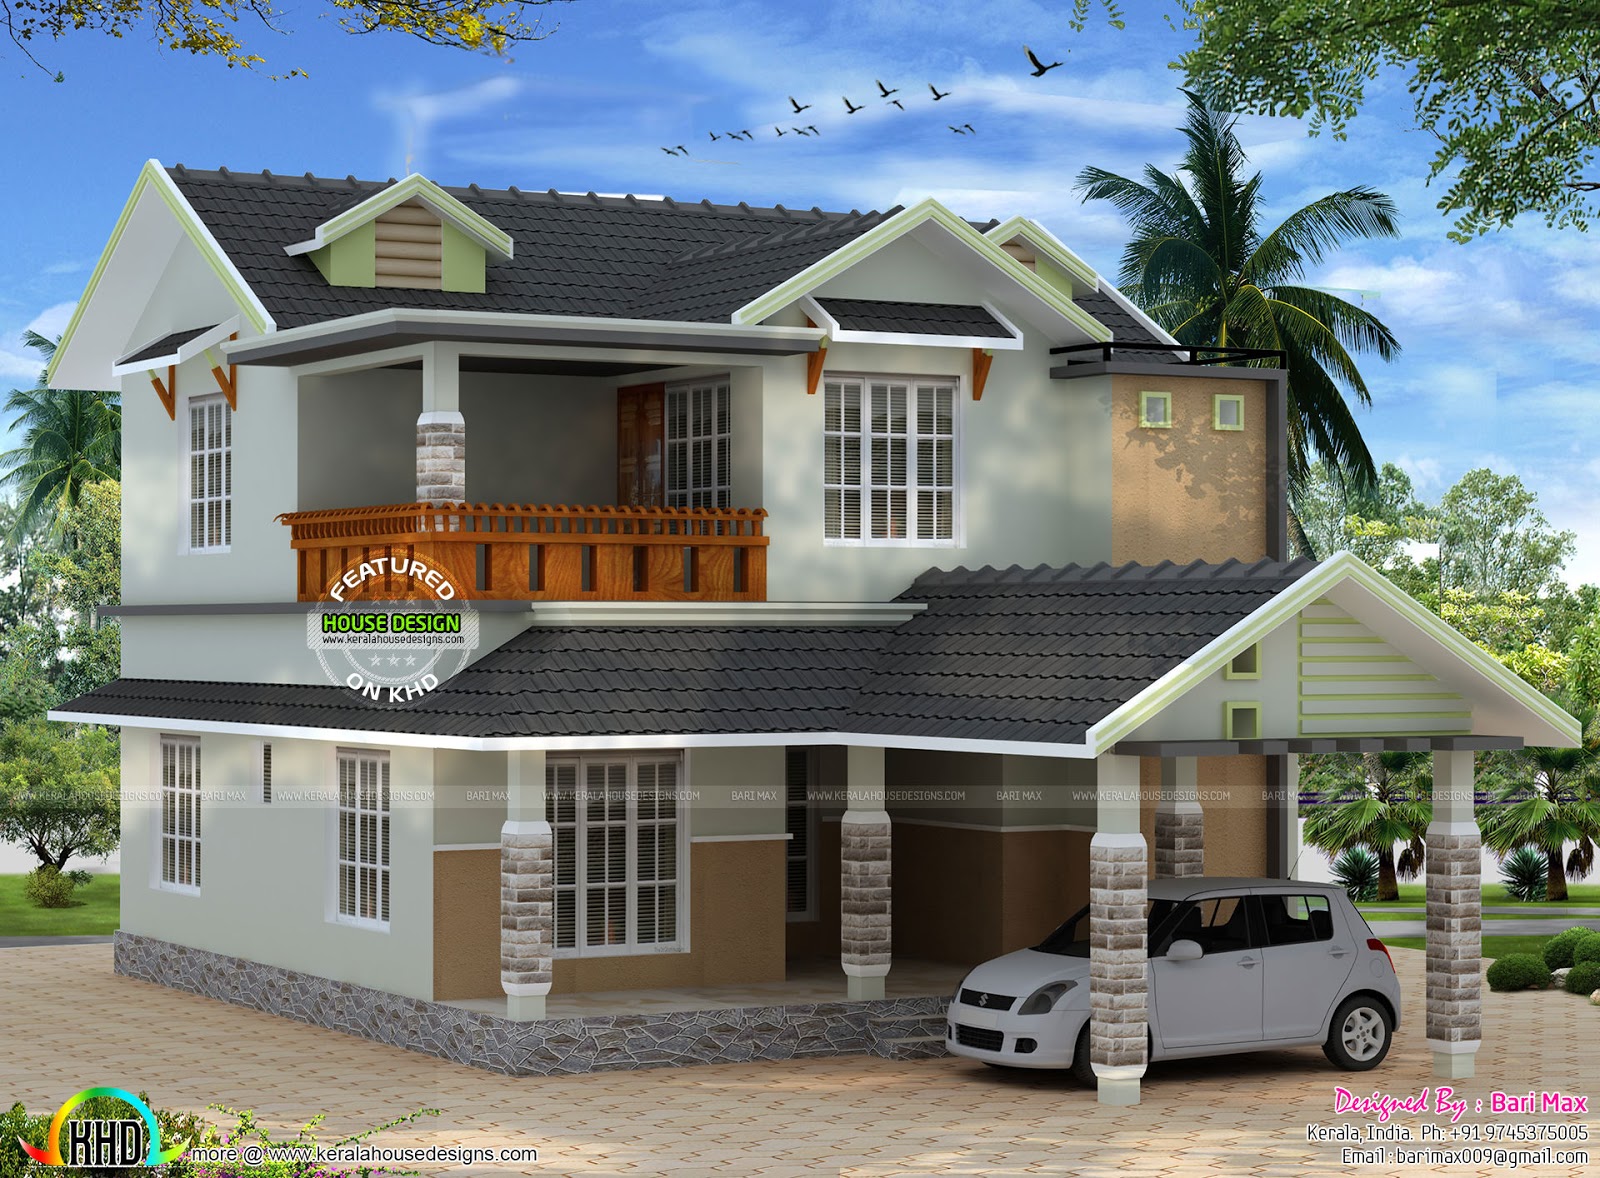 Sloping roof home design by Bari Max - Kerala home design and floor